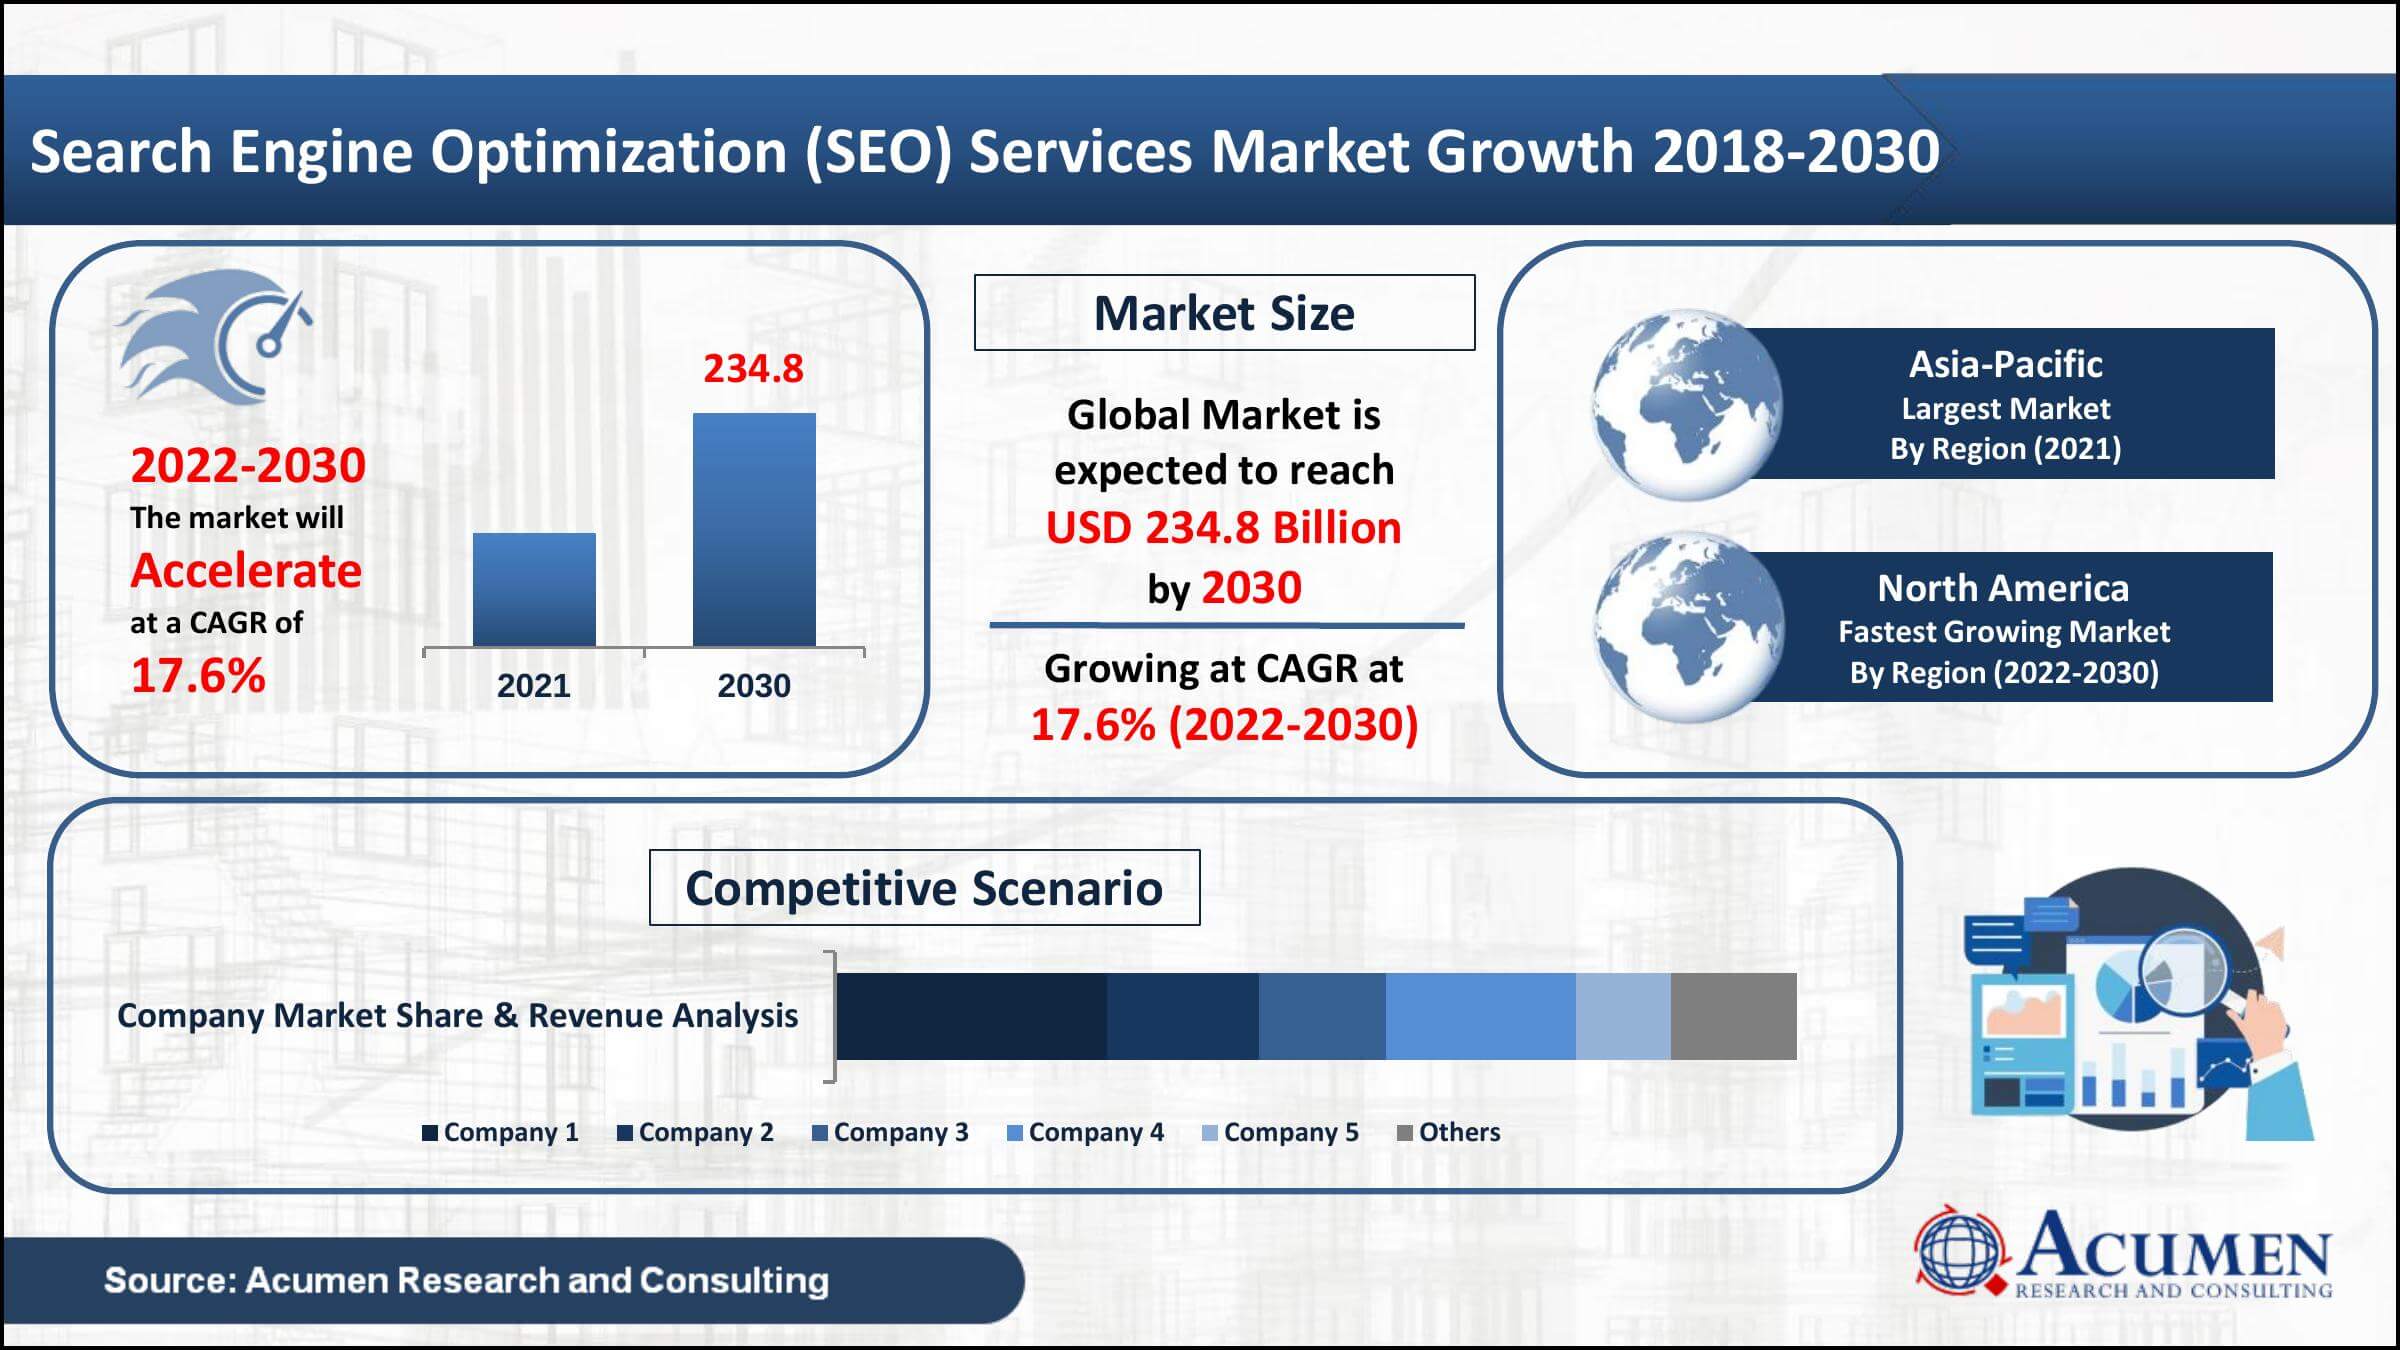 Global search engine optimization services market value collected USD 55.3 billion in 2021, with a 17.6% CAGR between 2022 and 2030